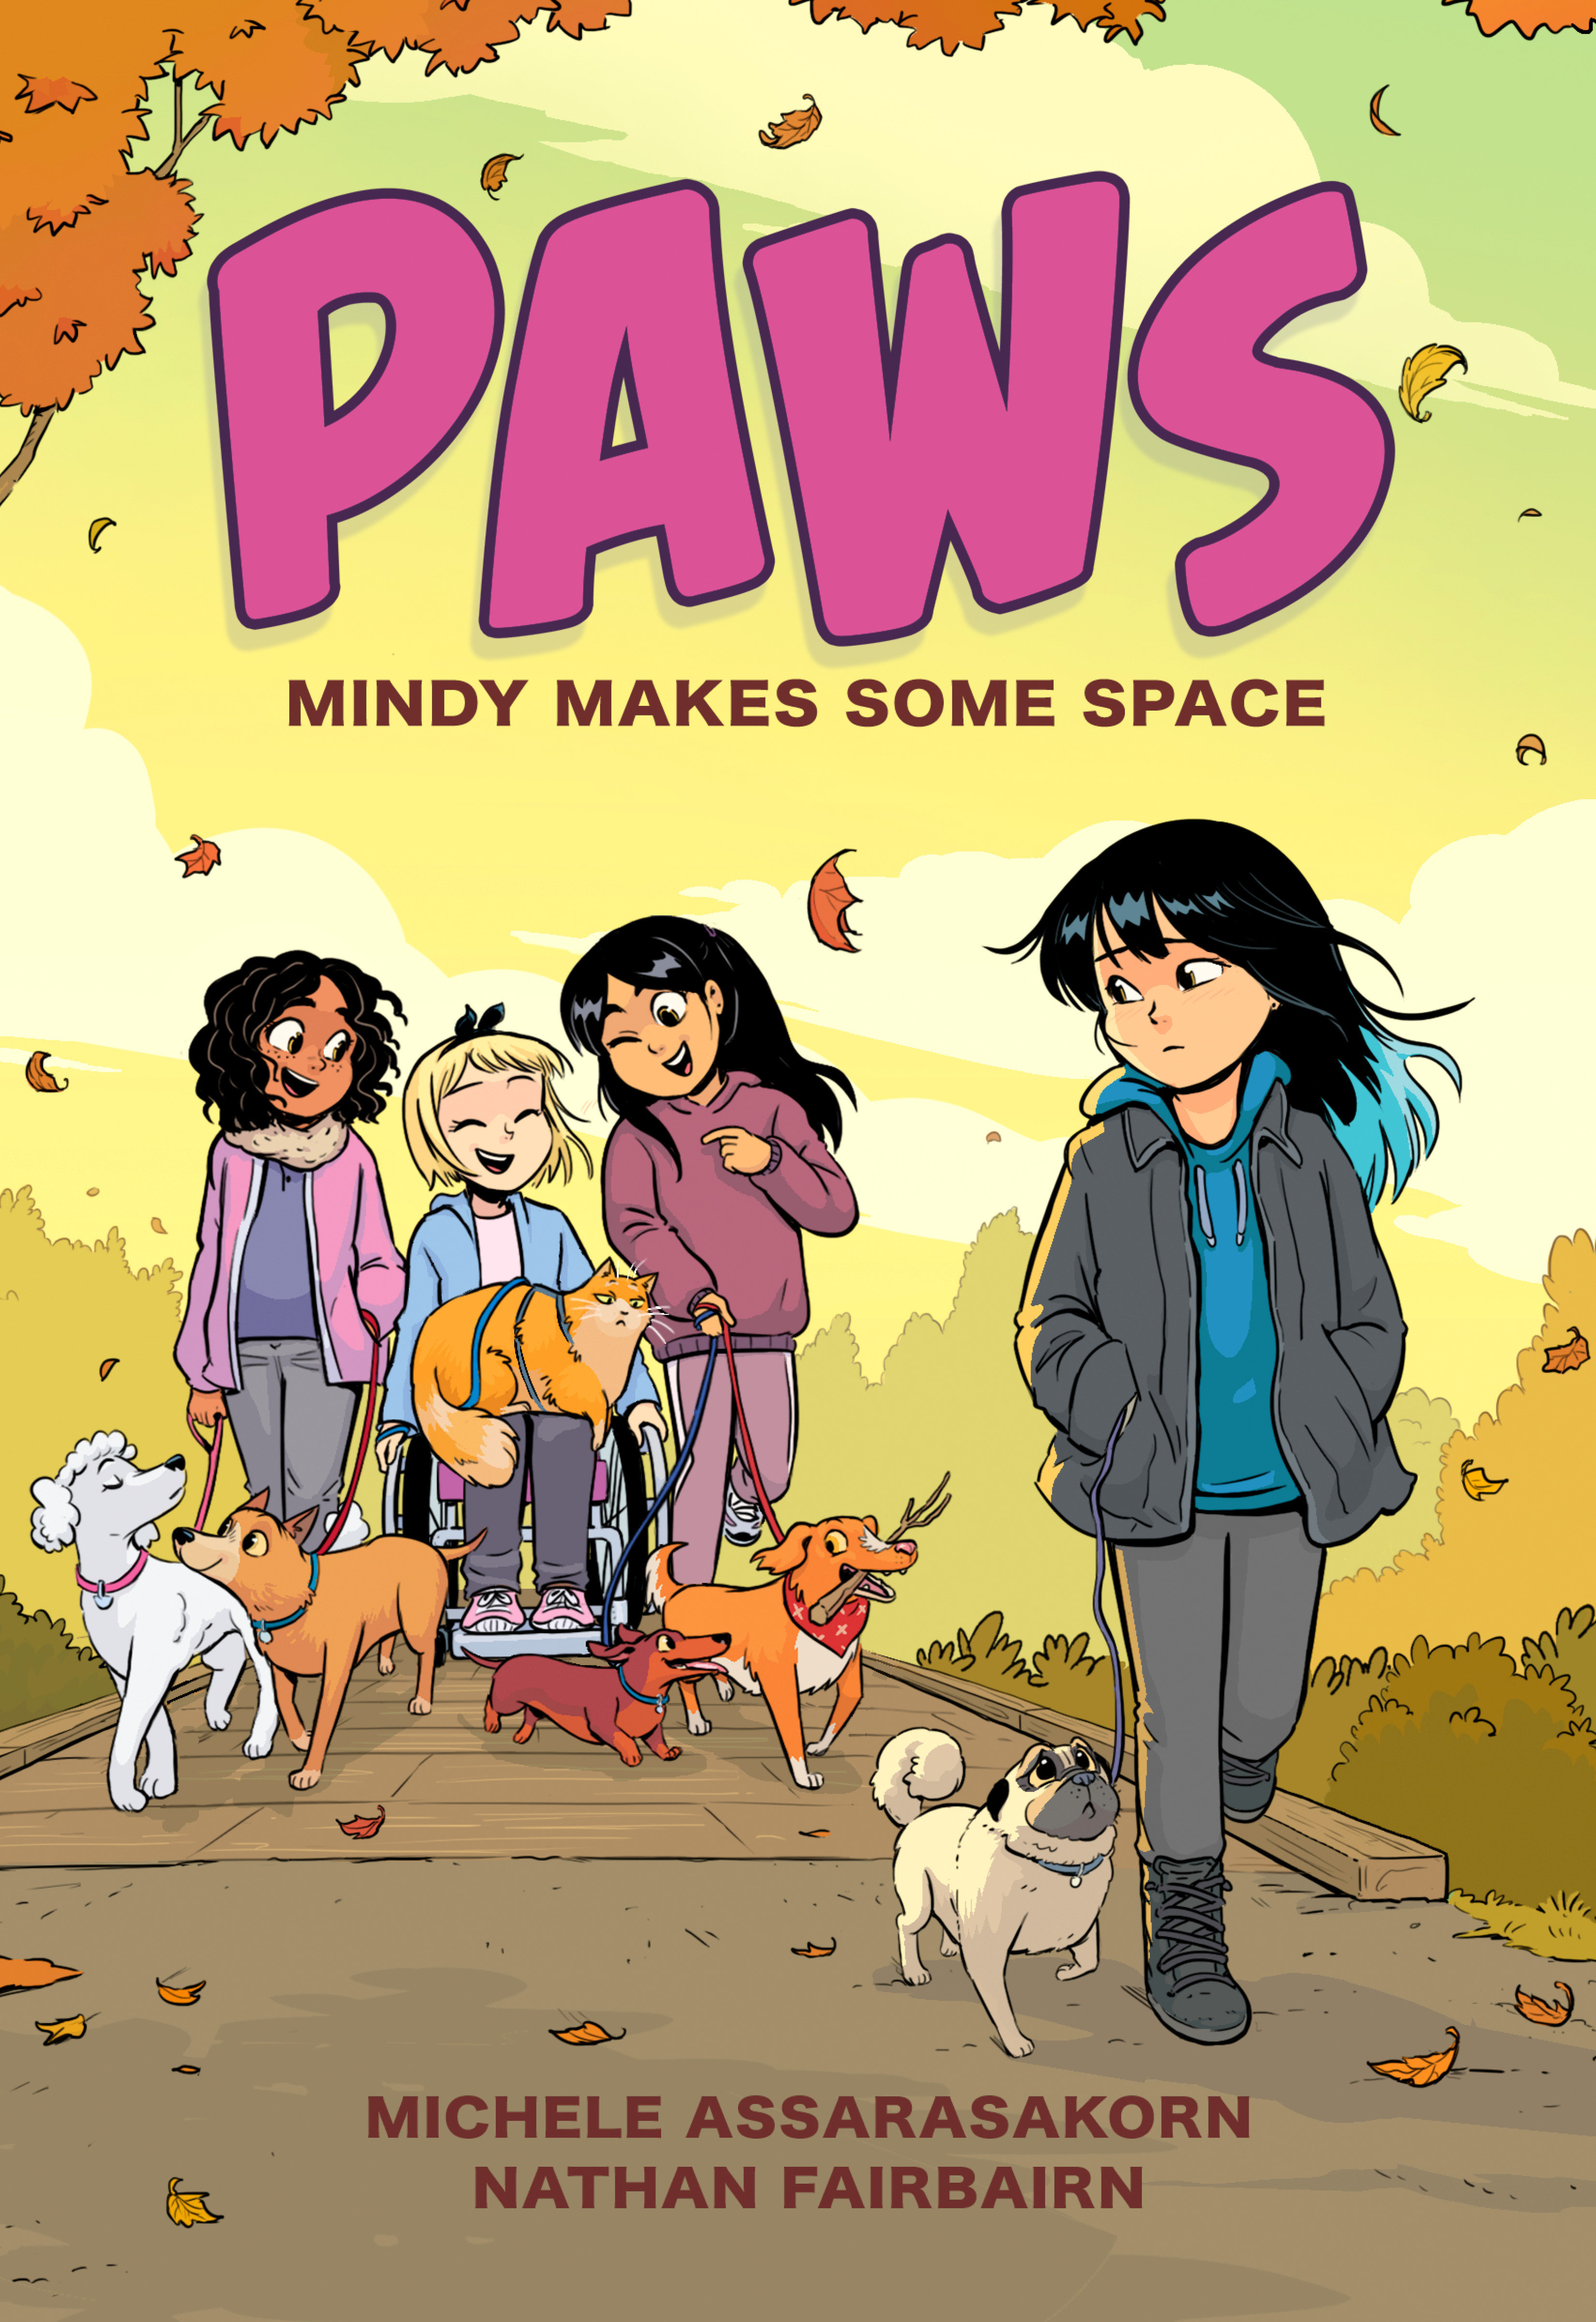 Paws Hardcover Graphic Novel Volume 2 Mindy Makes Some Space